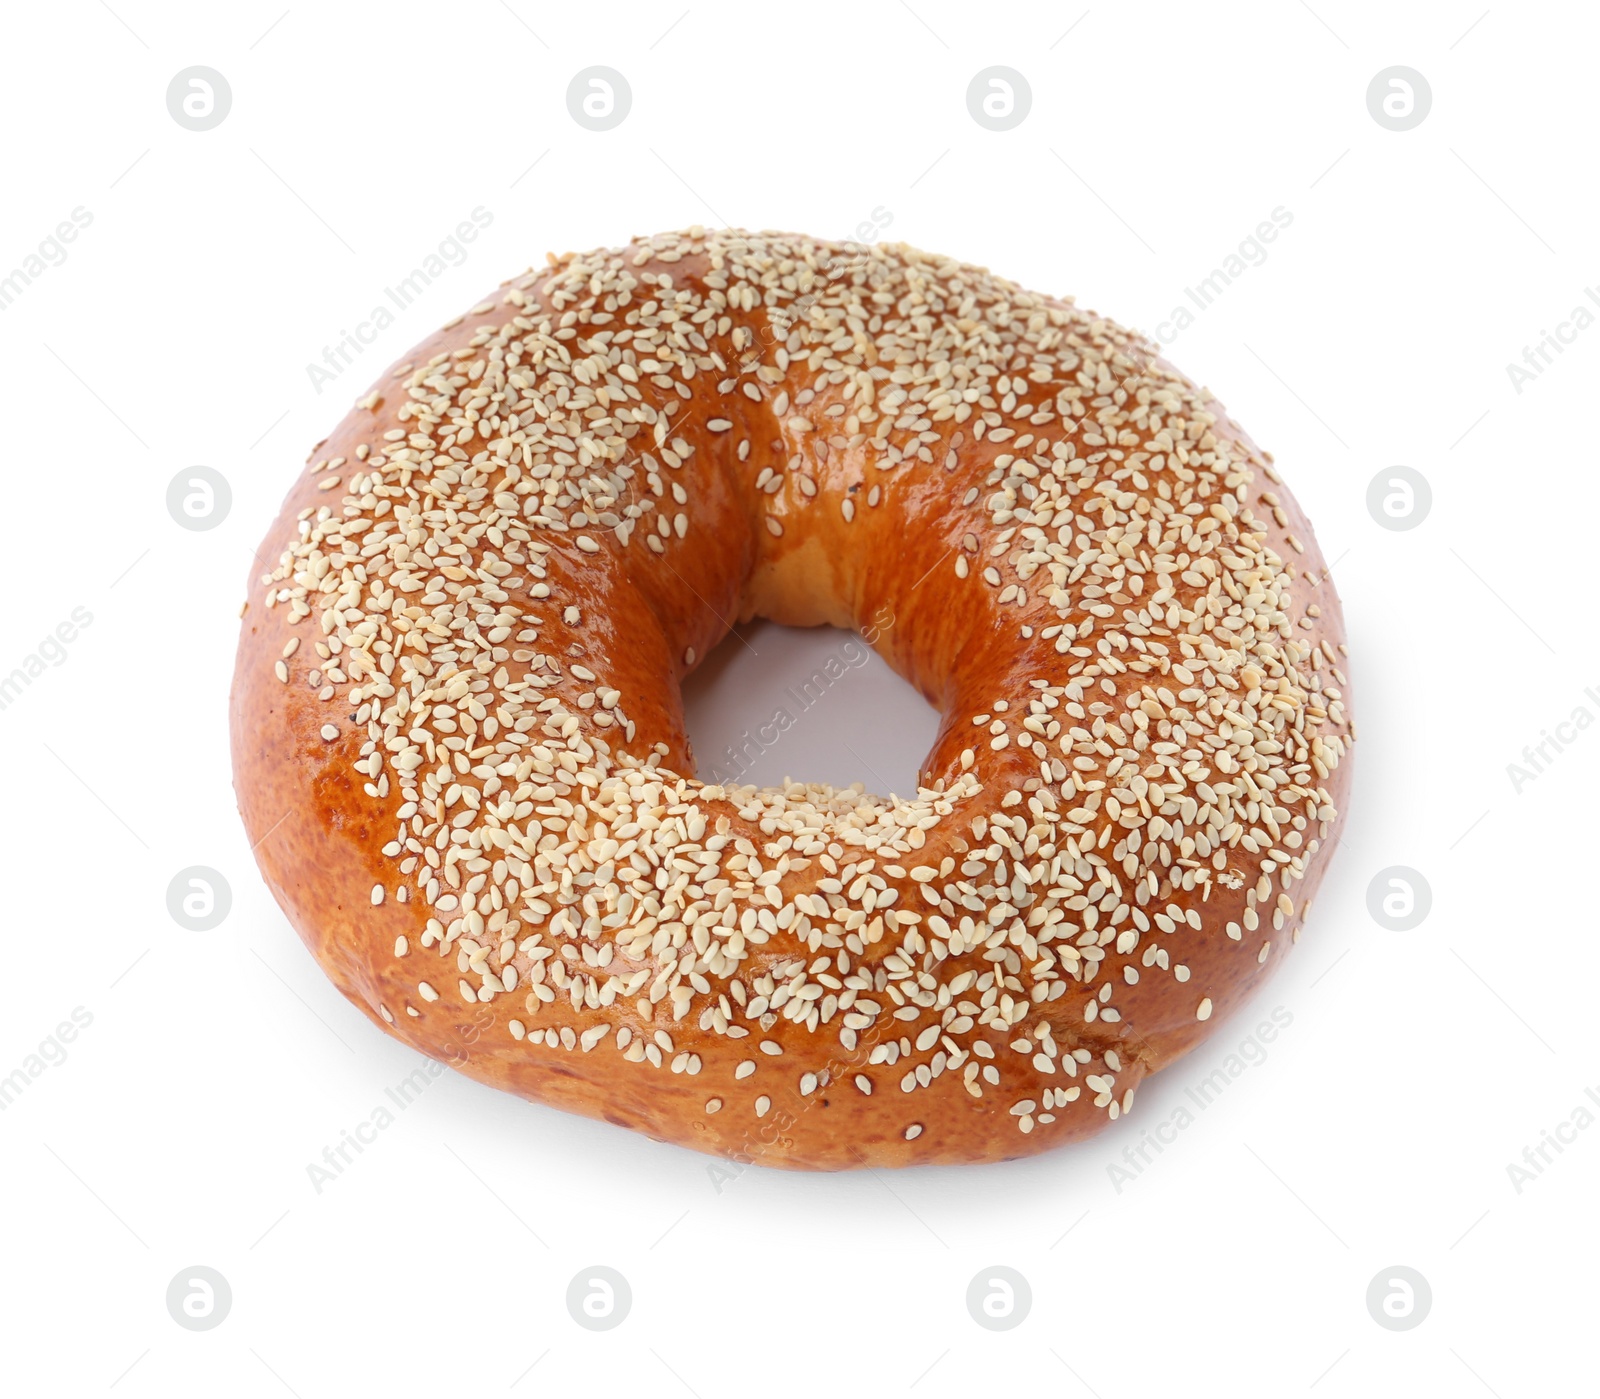 Photo of Delicious fresh bagel with sesame seeds isolated on white